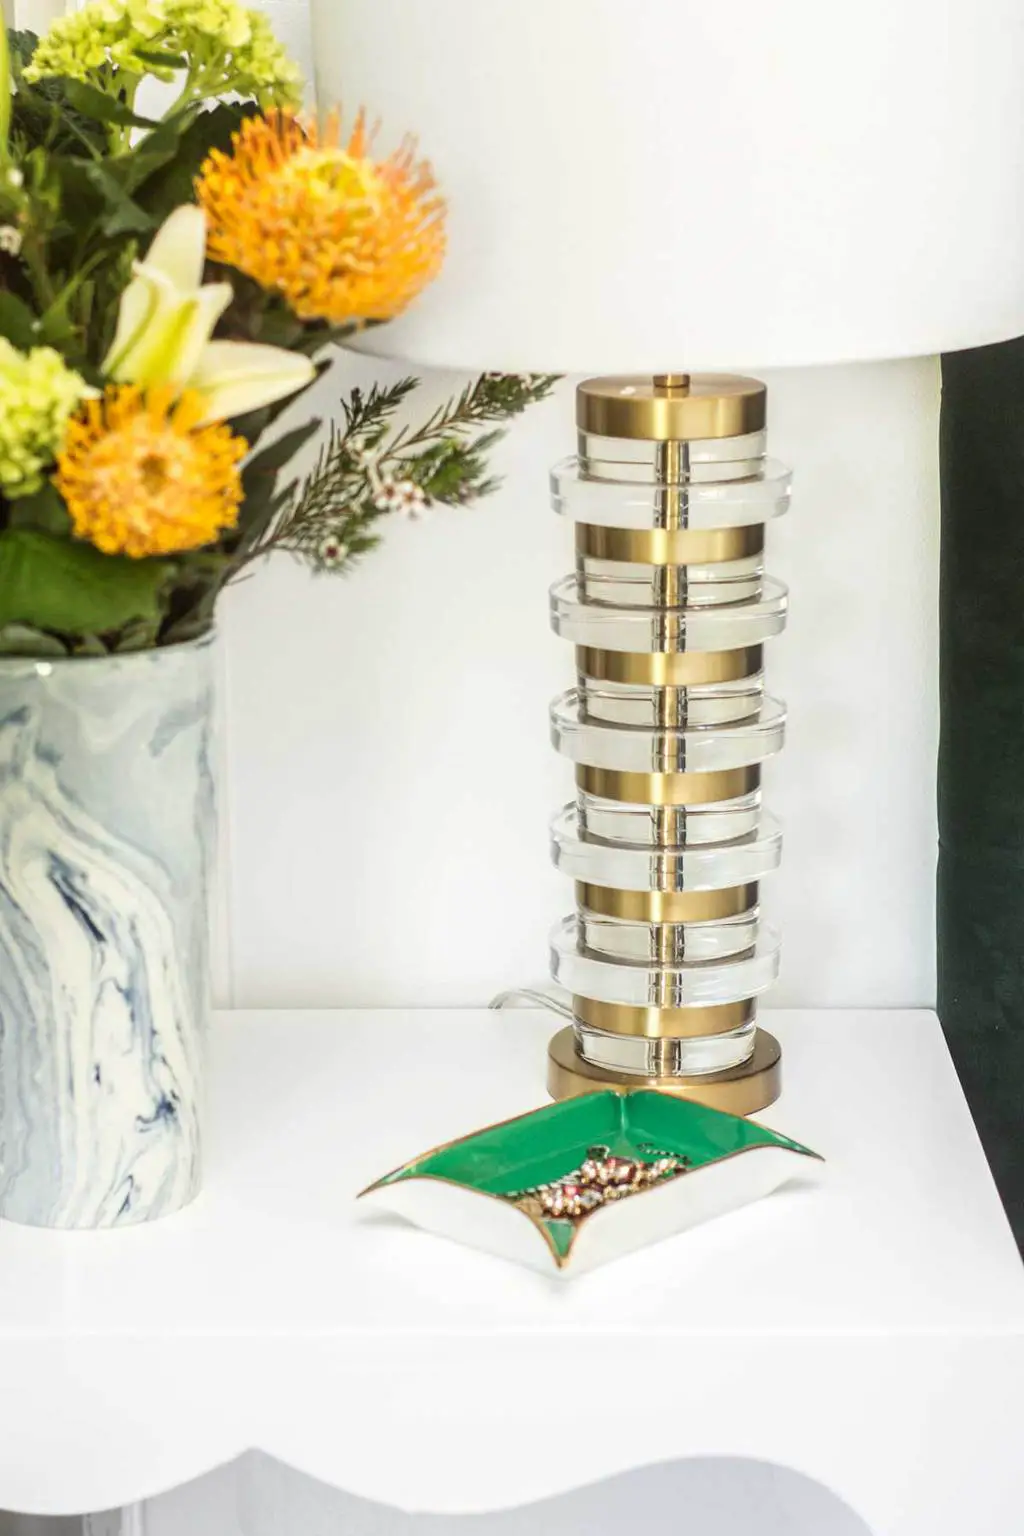 Brass table lamp and blue marbleized vase on bedside table via Thou Swell @thouswellblog